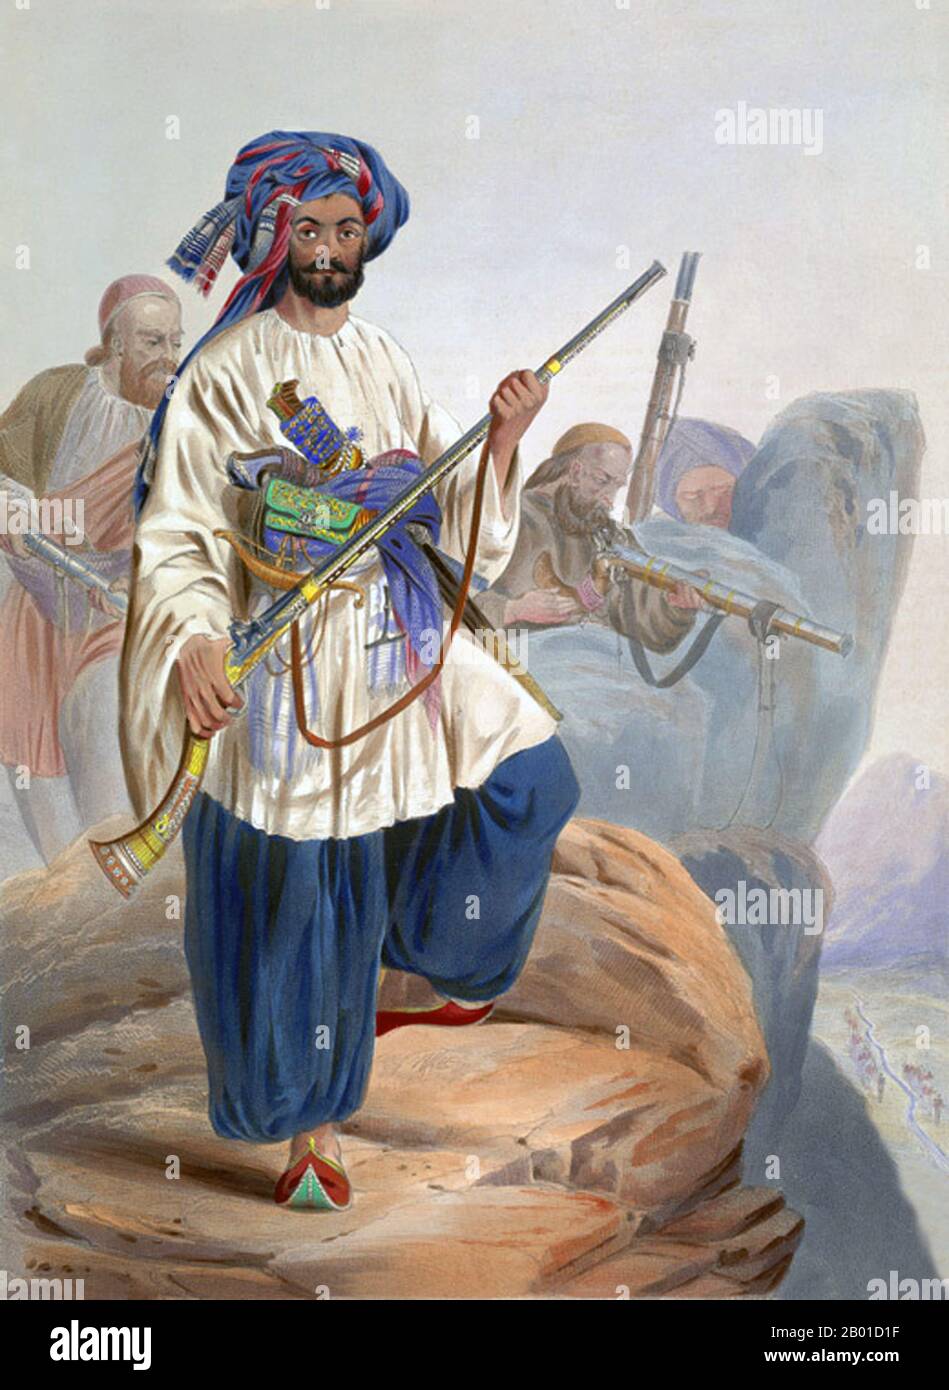 Afghanistan: Mir Alam of Kohistan. Lithograph from 'Afghaunistan' by Lieutenant James Rattray (1818 - 24 October 1854), c. 1839-1841.  The Kohistani is Mir Alam, formerly one of a band of noted robbers on the road to Turkestan, north-west of Begram. Rattray wrote: 'Coistaun has always been remarkable for the war-like character of its inhabitants, who average some forty thousand families famous for the efficiency and excellence of their Pyadas (foot-soldiery). As light infantry they are unrivalled...' Stock Photo